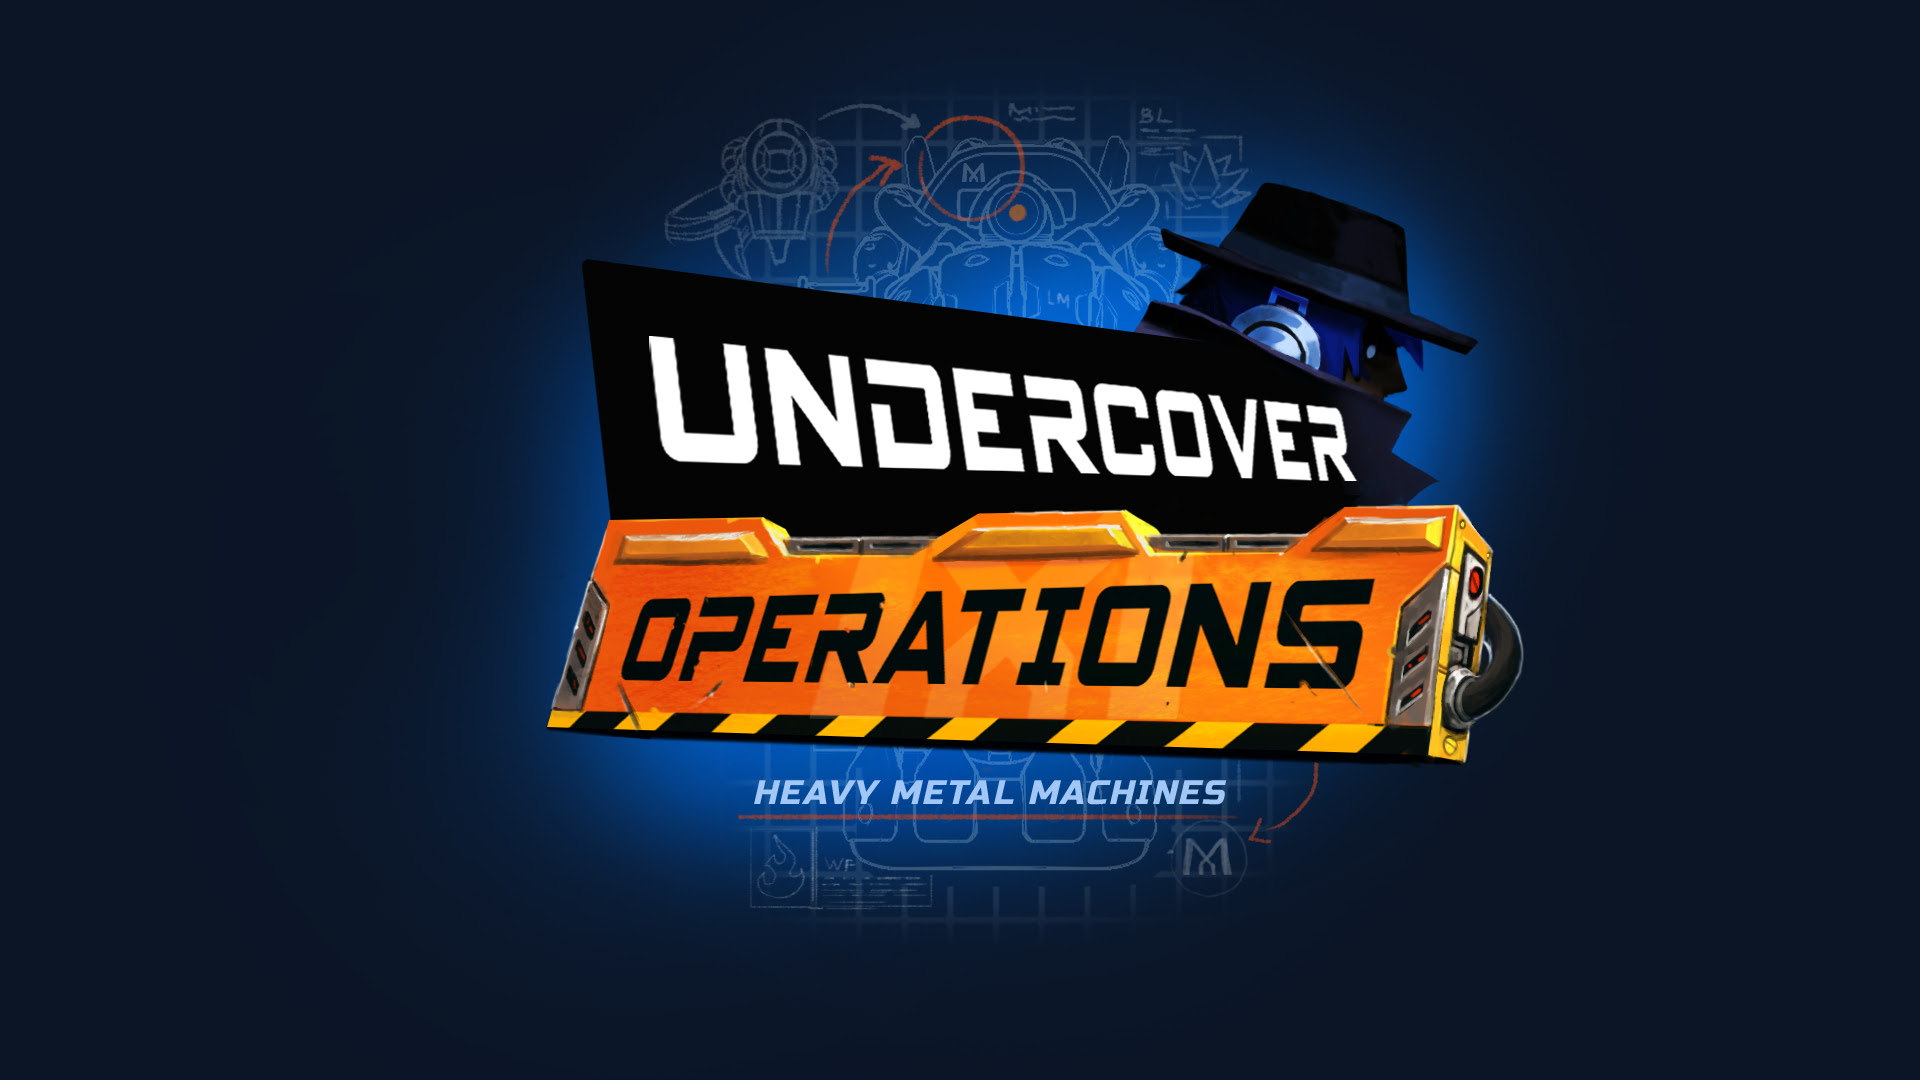 Heavy Metal Machines - Undercover Operations